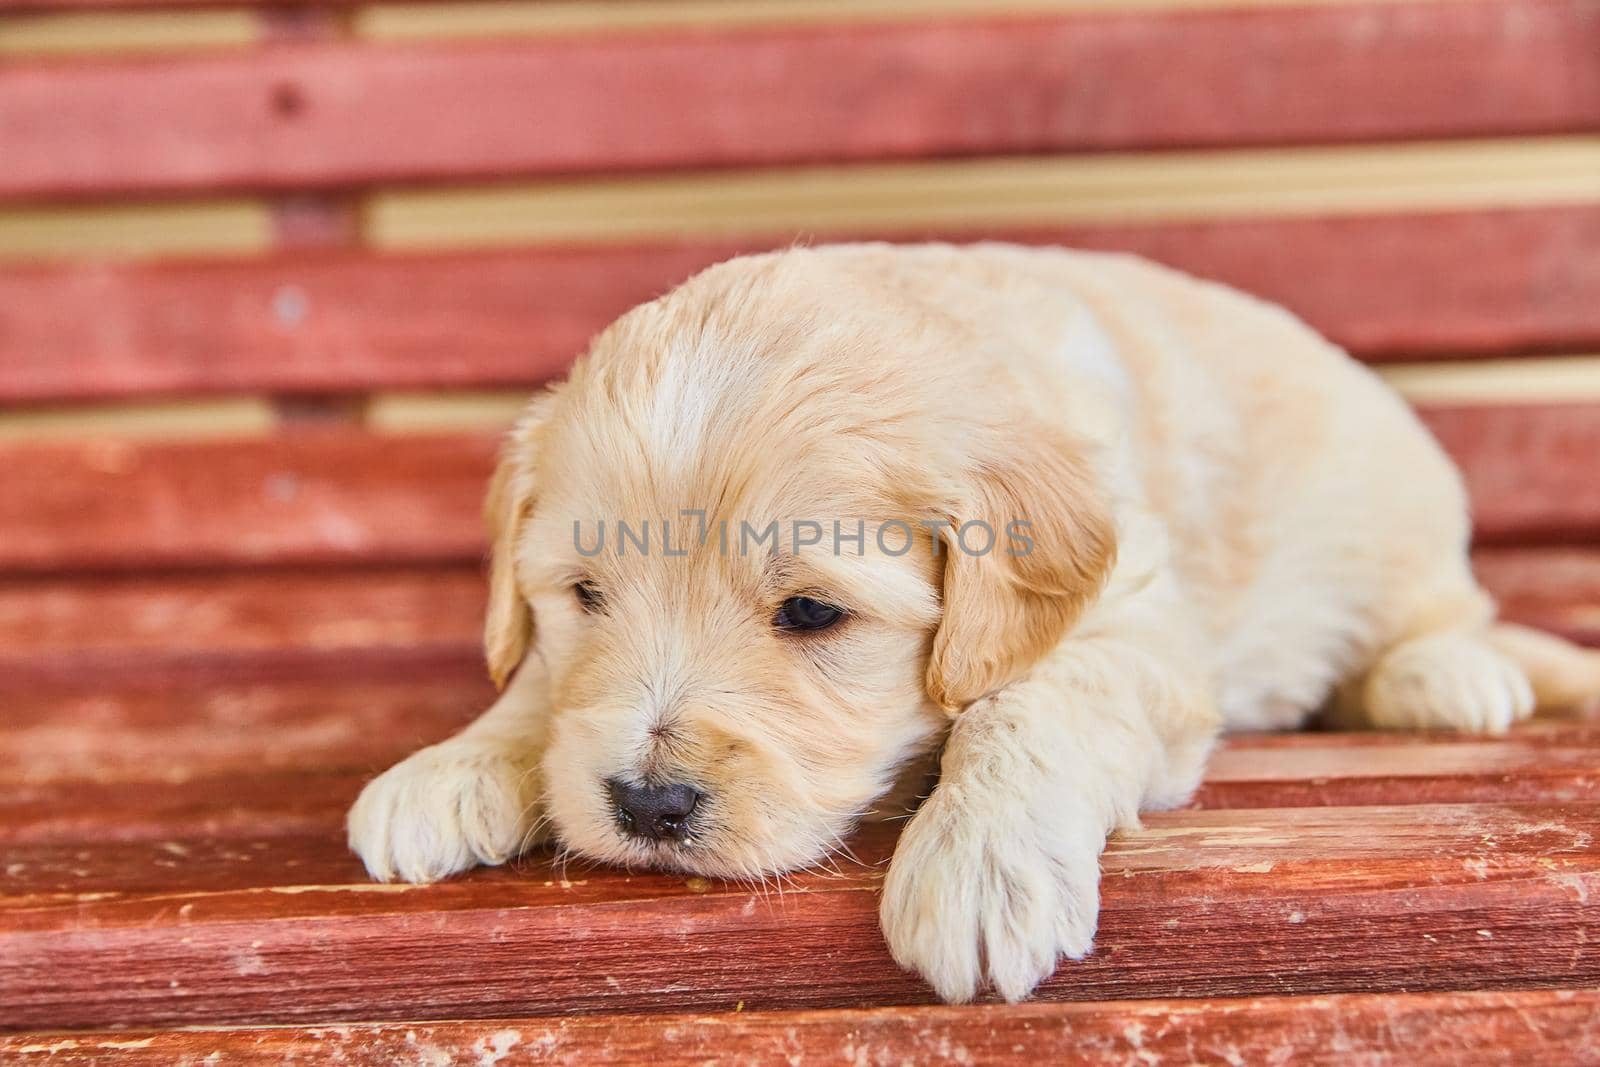 White golden retriever almost asleep in red bench by njproductions